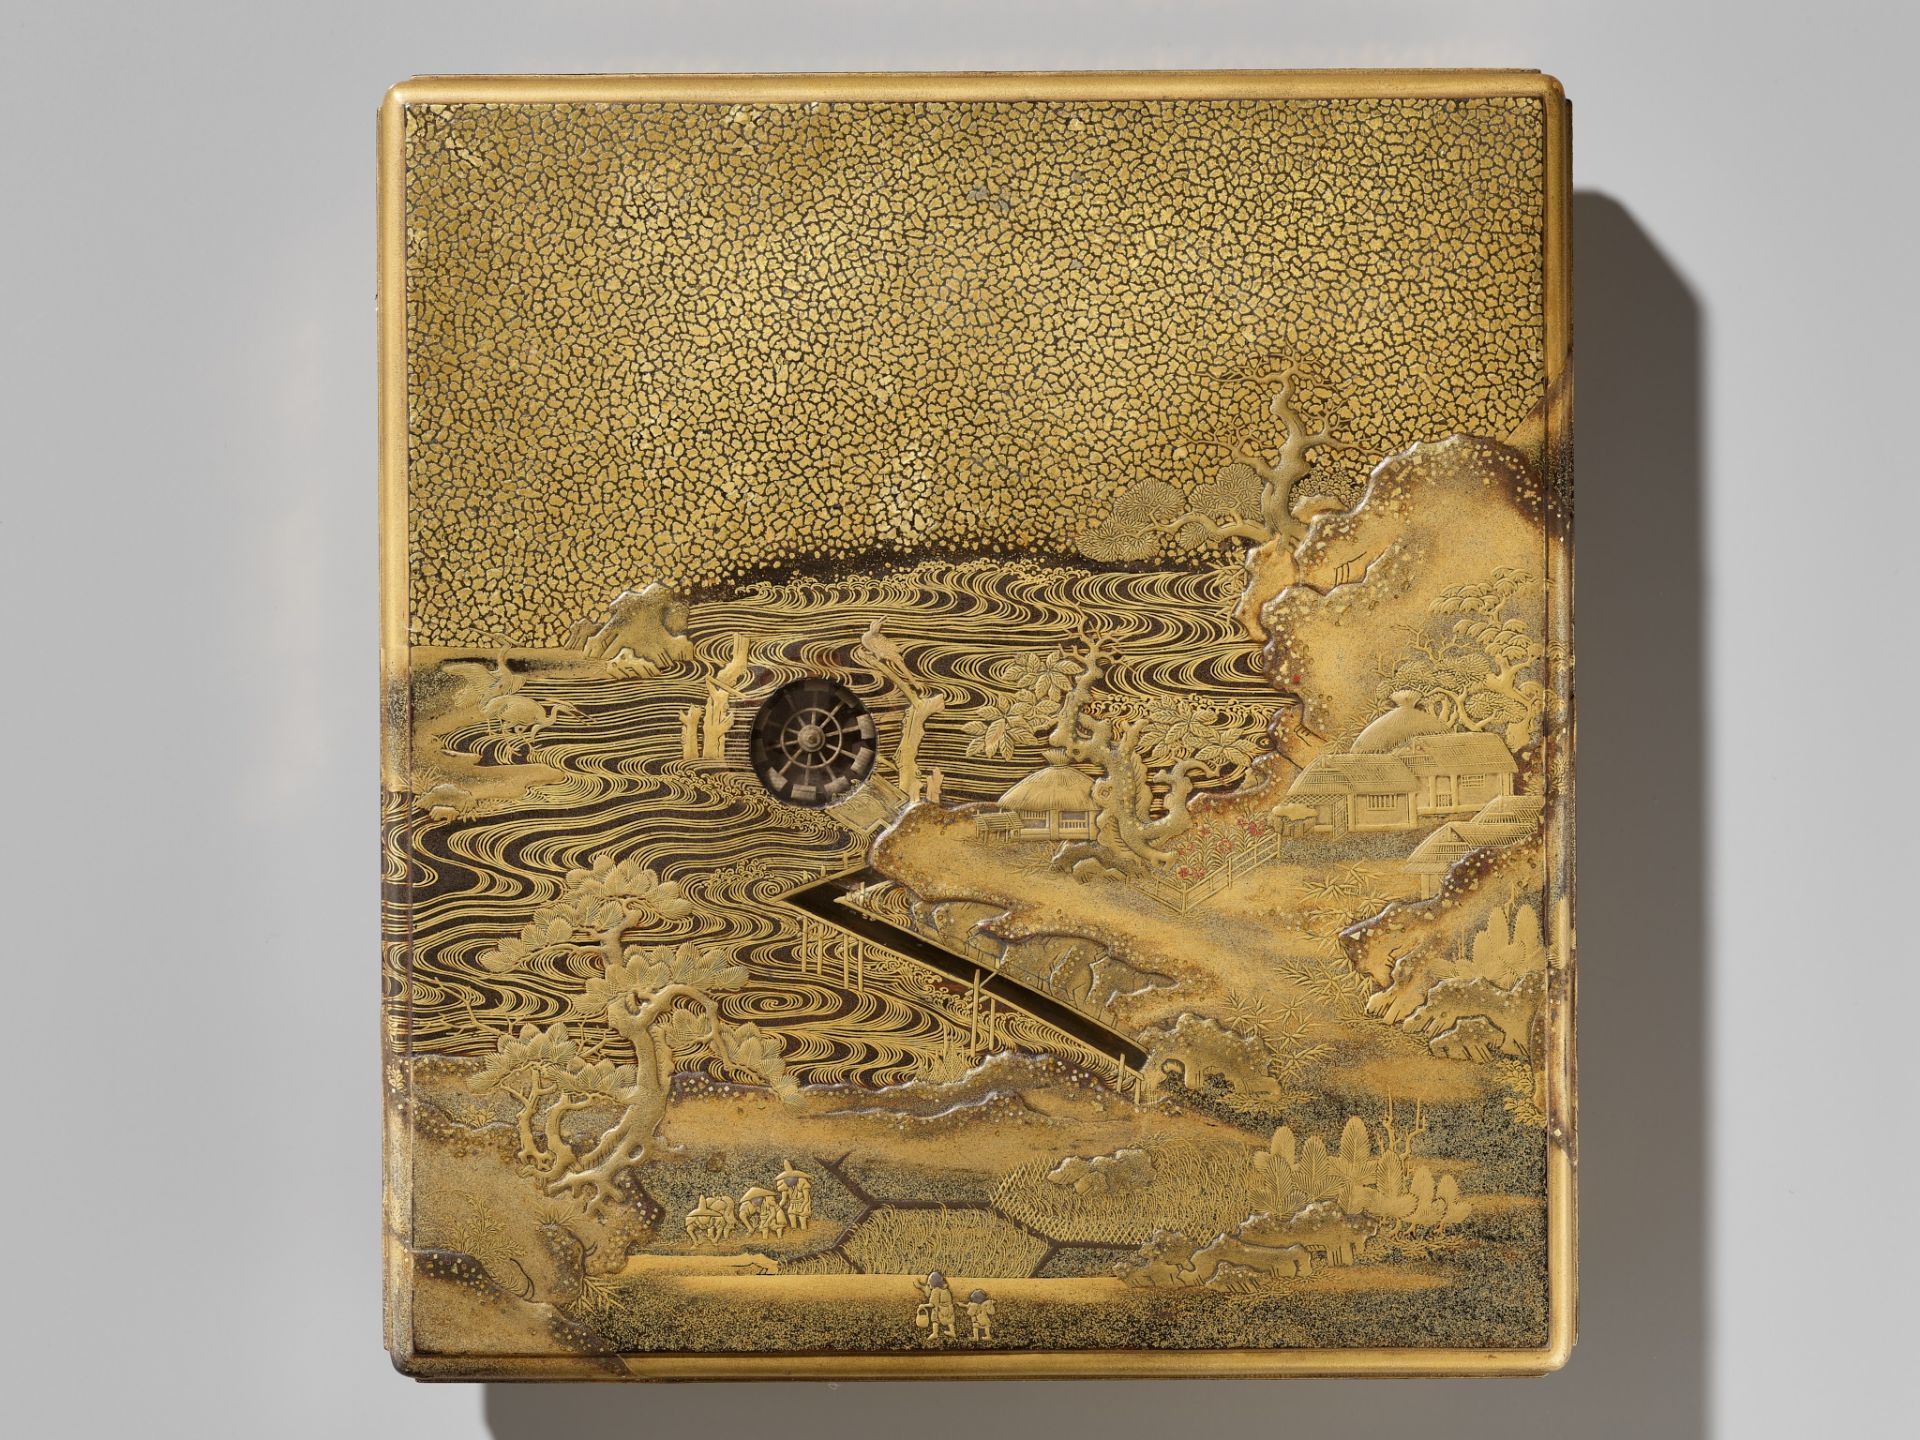 A SUPERB LACQUER SUZURIBAKO WITH A 'WATERWHEEL' MERCURY MECHANISM - Image 17 of 17